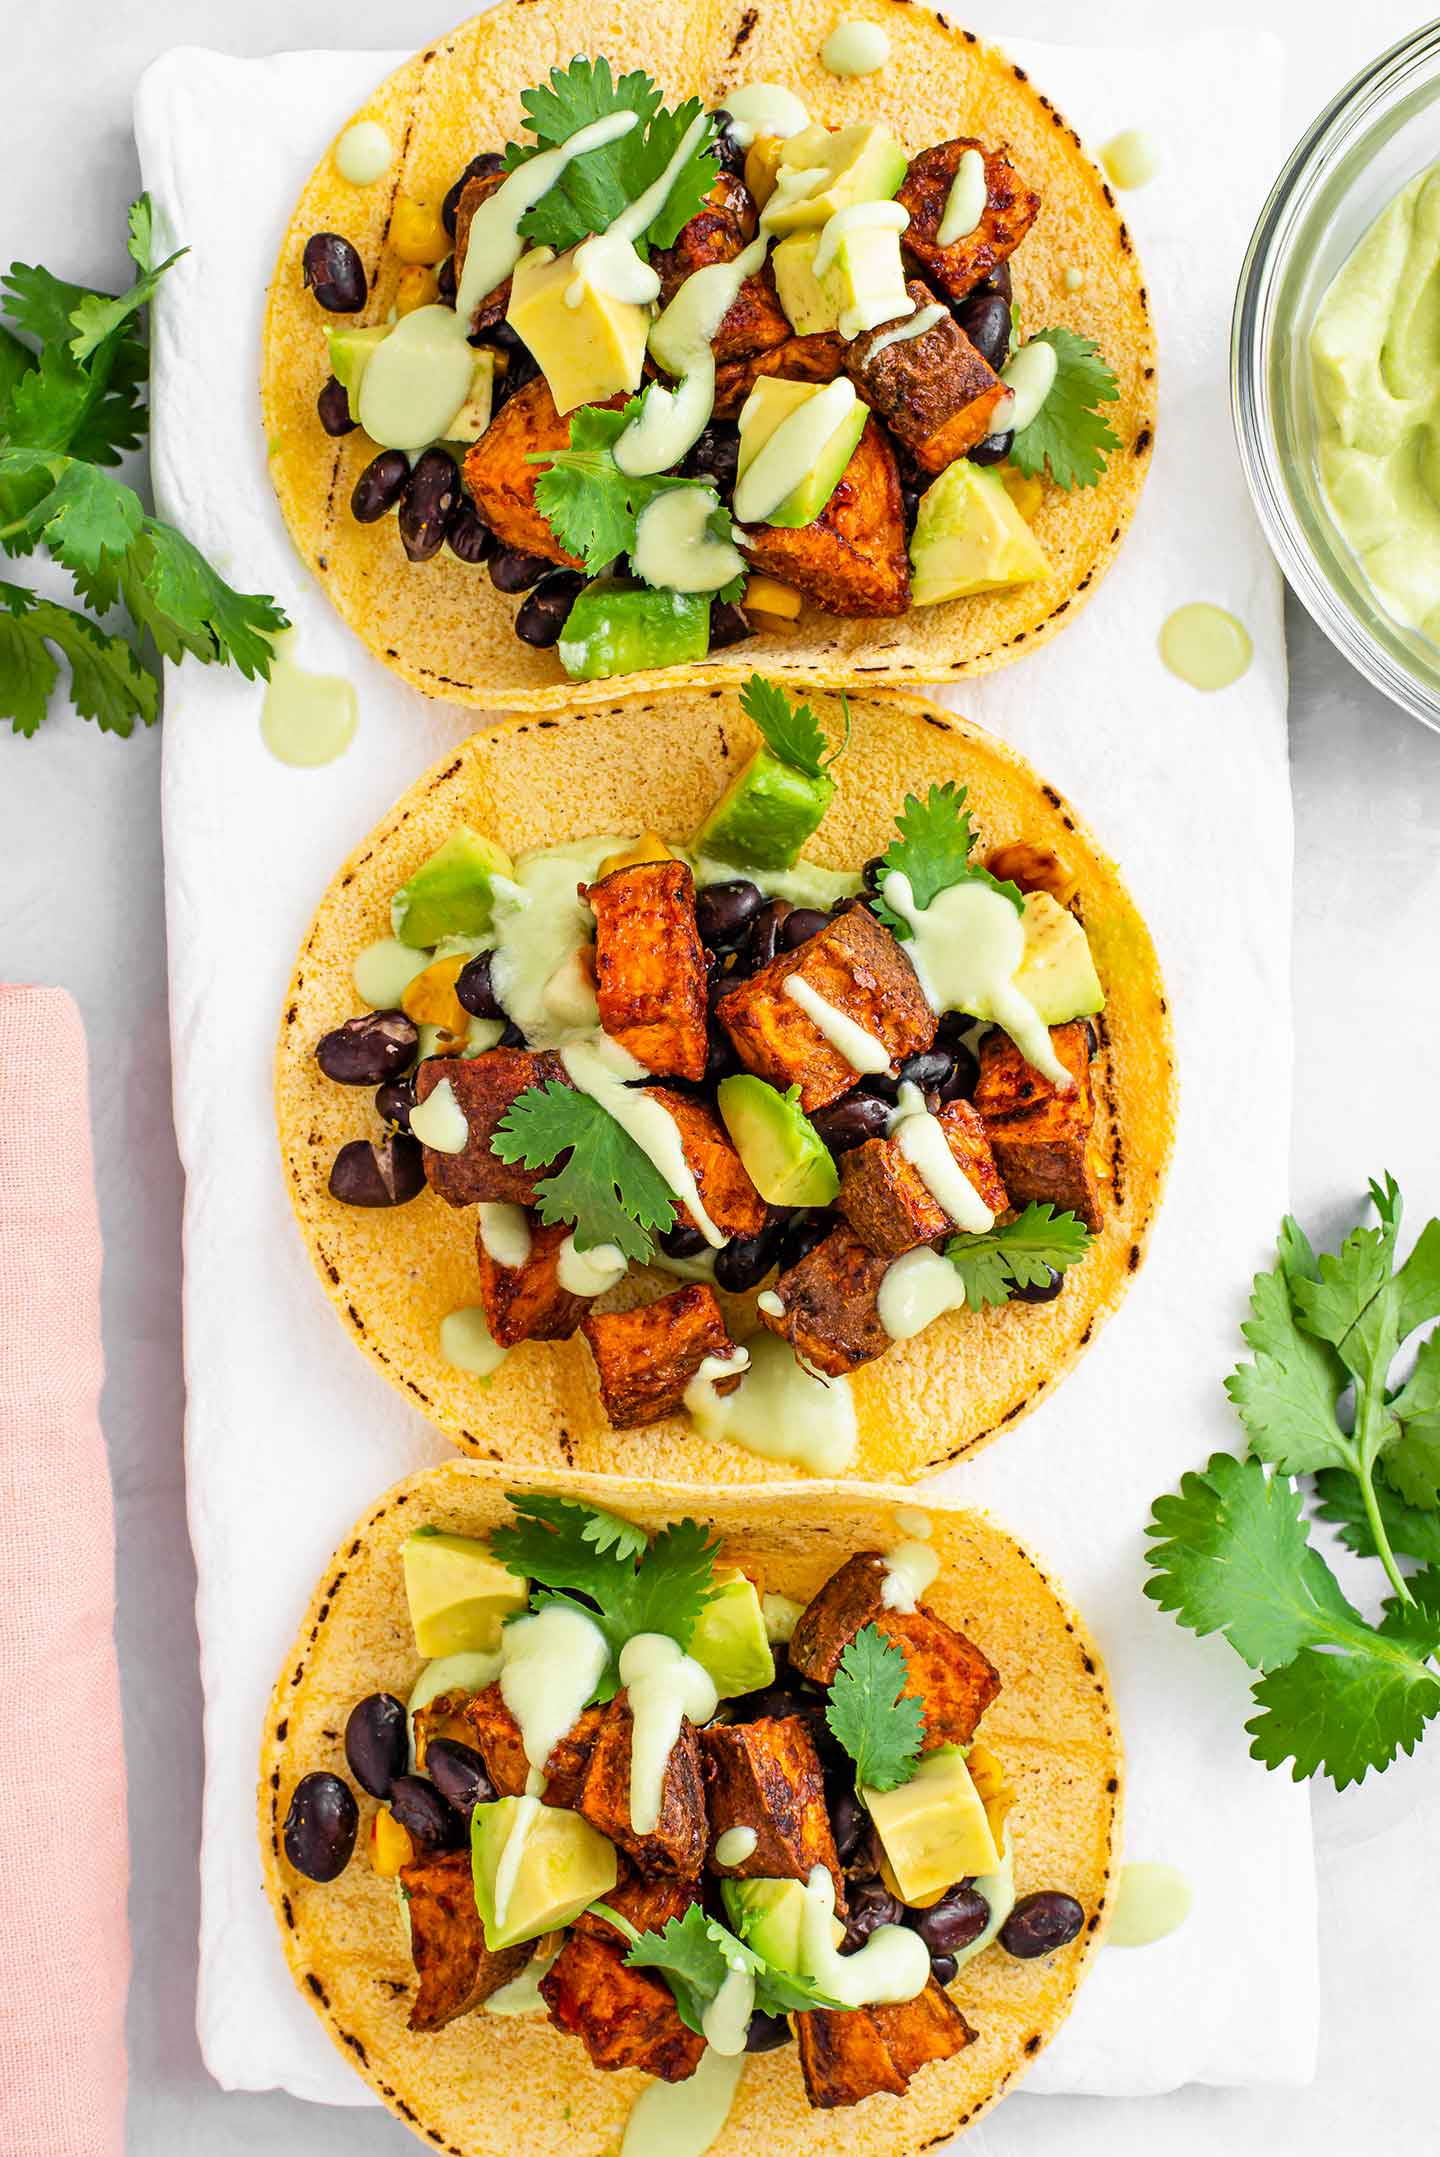 Top down view of three corn tortillas on a white tray filled with sweet potato, black beans, corn, diced avocado and drizzled with a light green avocado crema. Fresh cilantro garnishes.